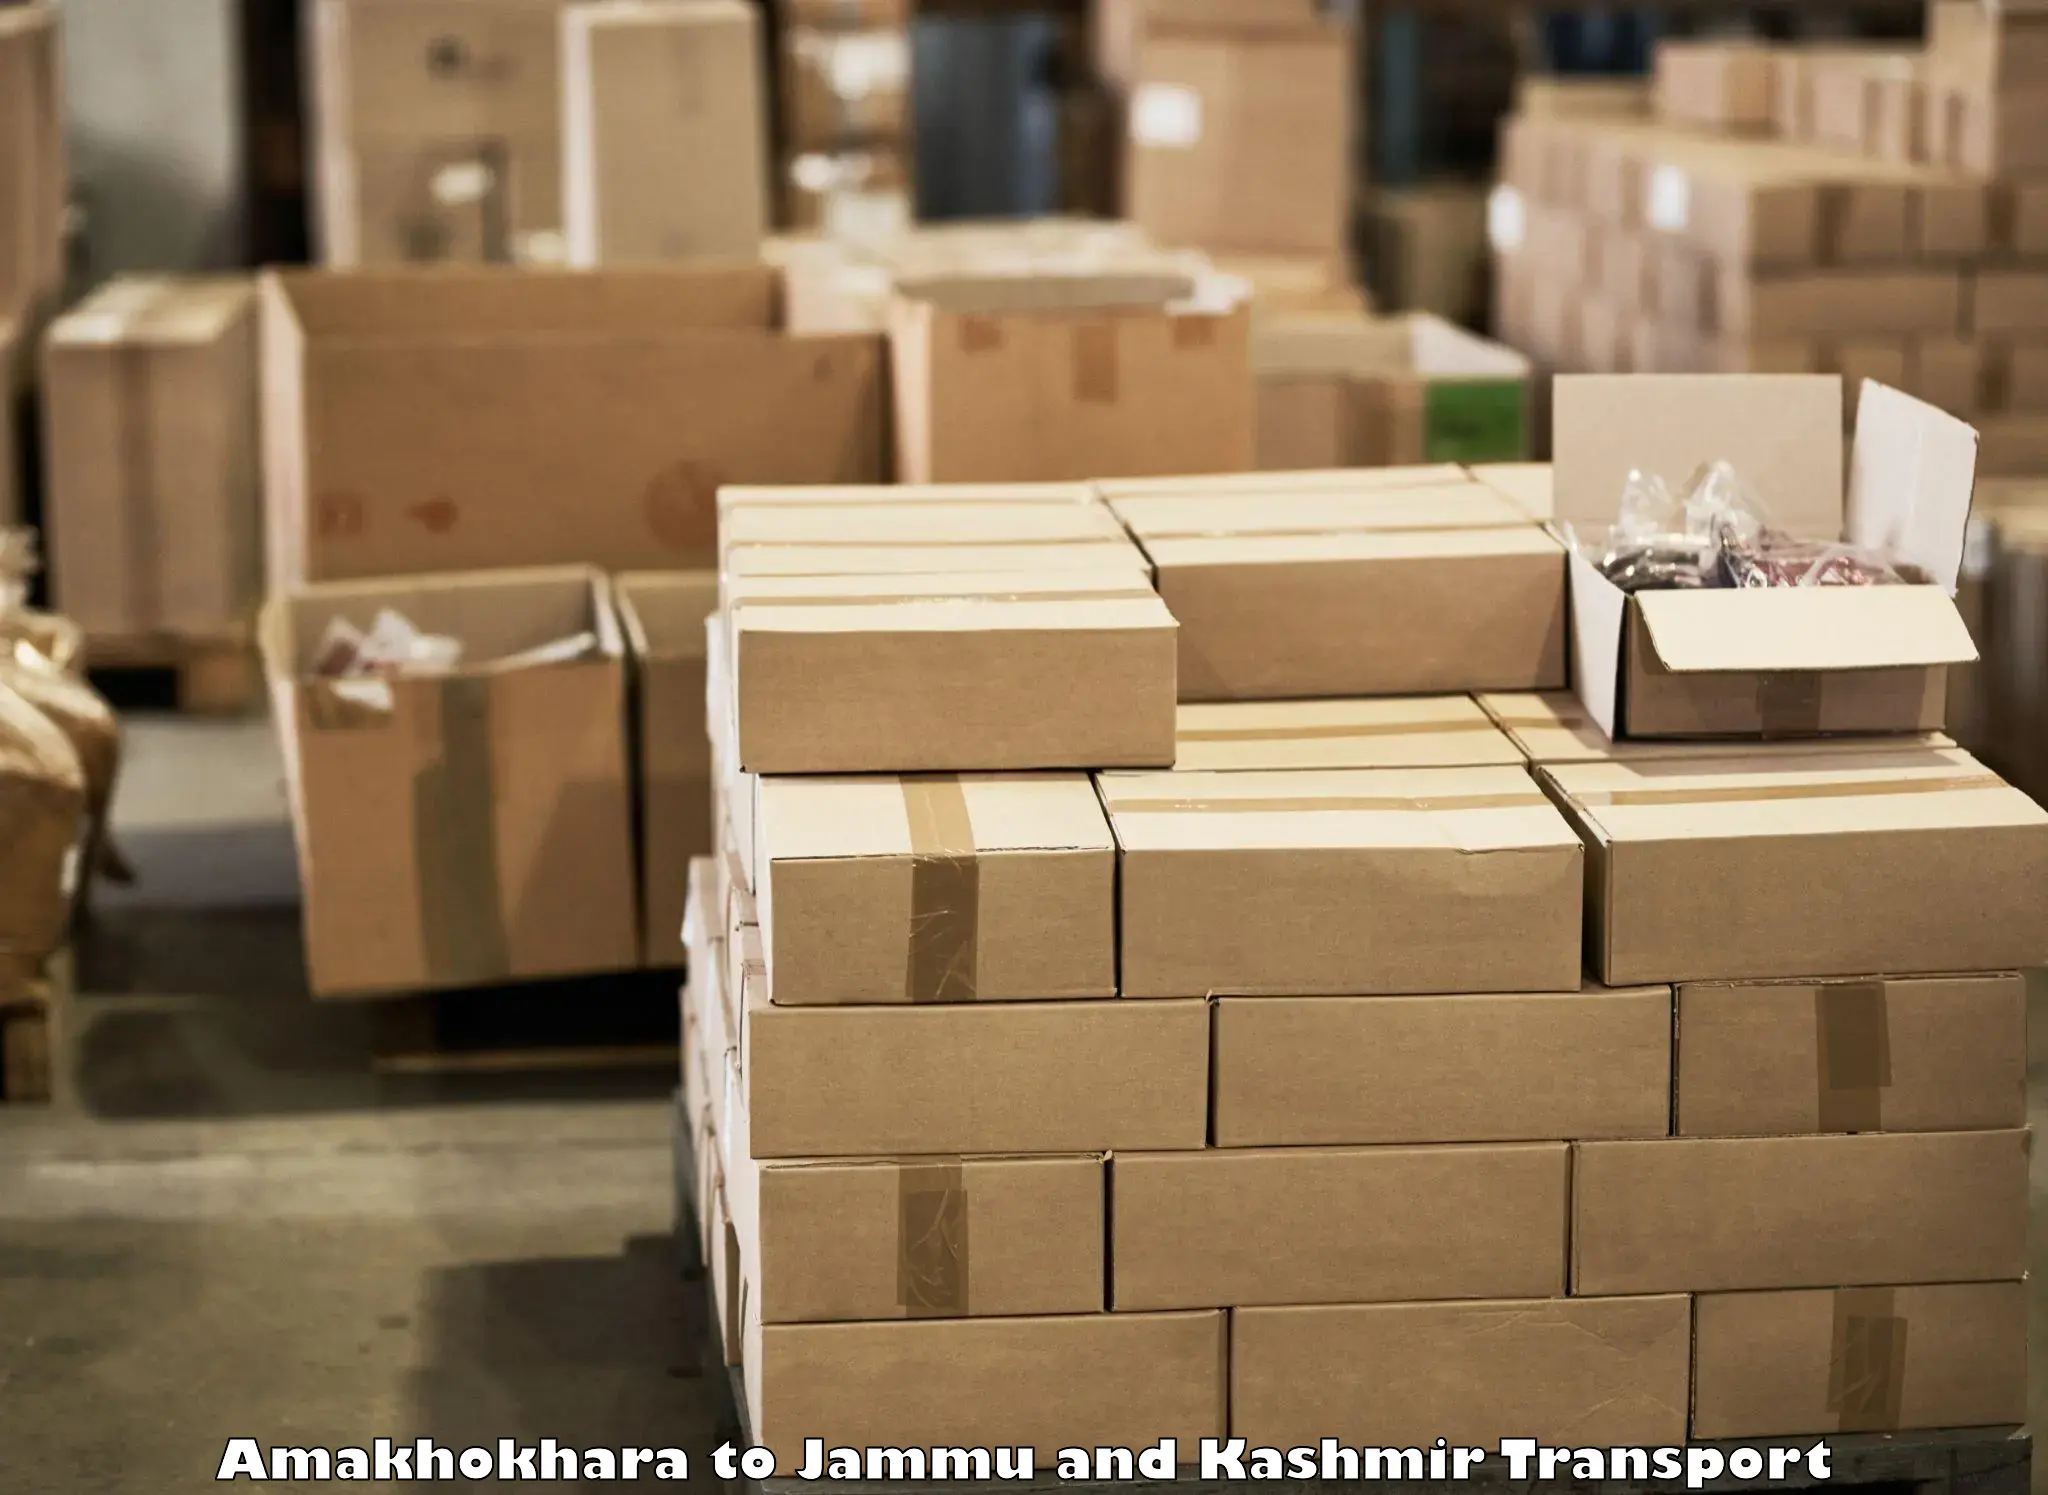 Container transport service Amakhokhara to Udhampur